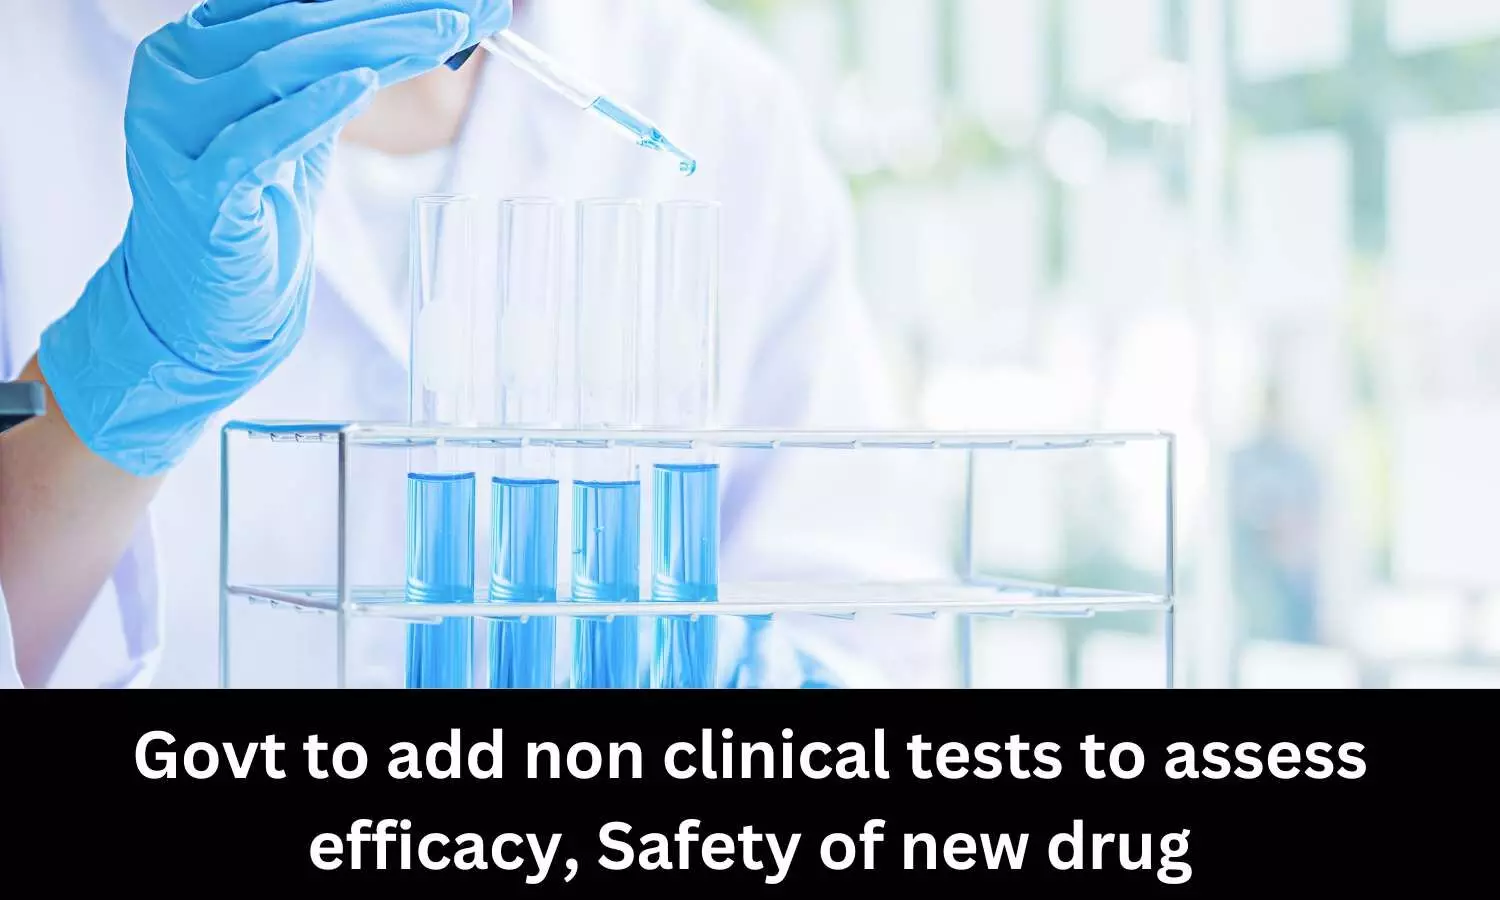 Govt to include non-clinical testing methods to assess safety, efficacy of new drug